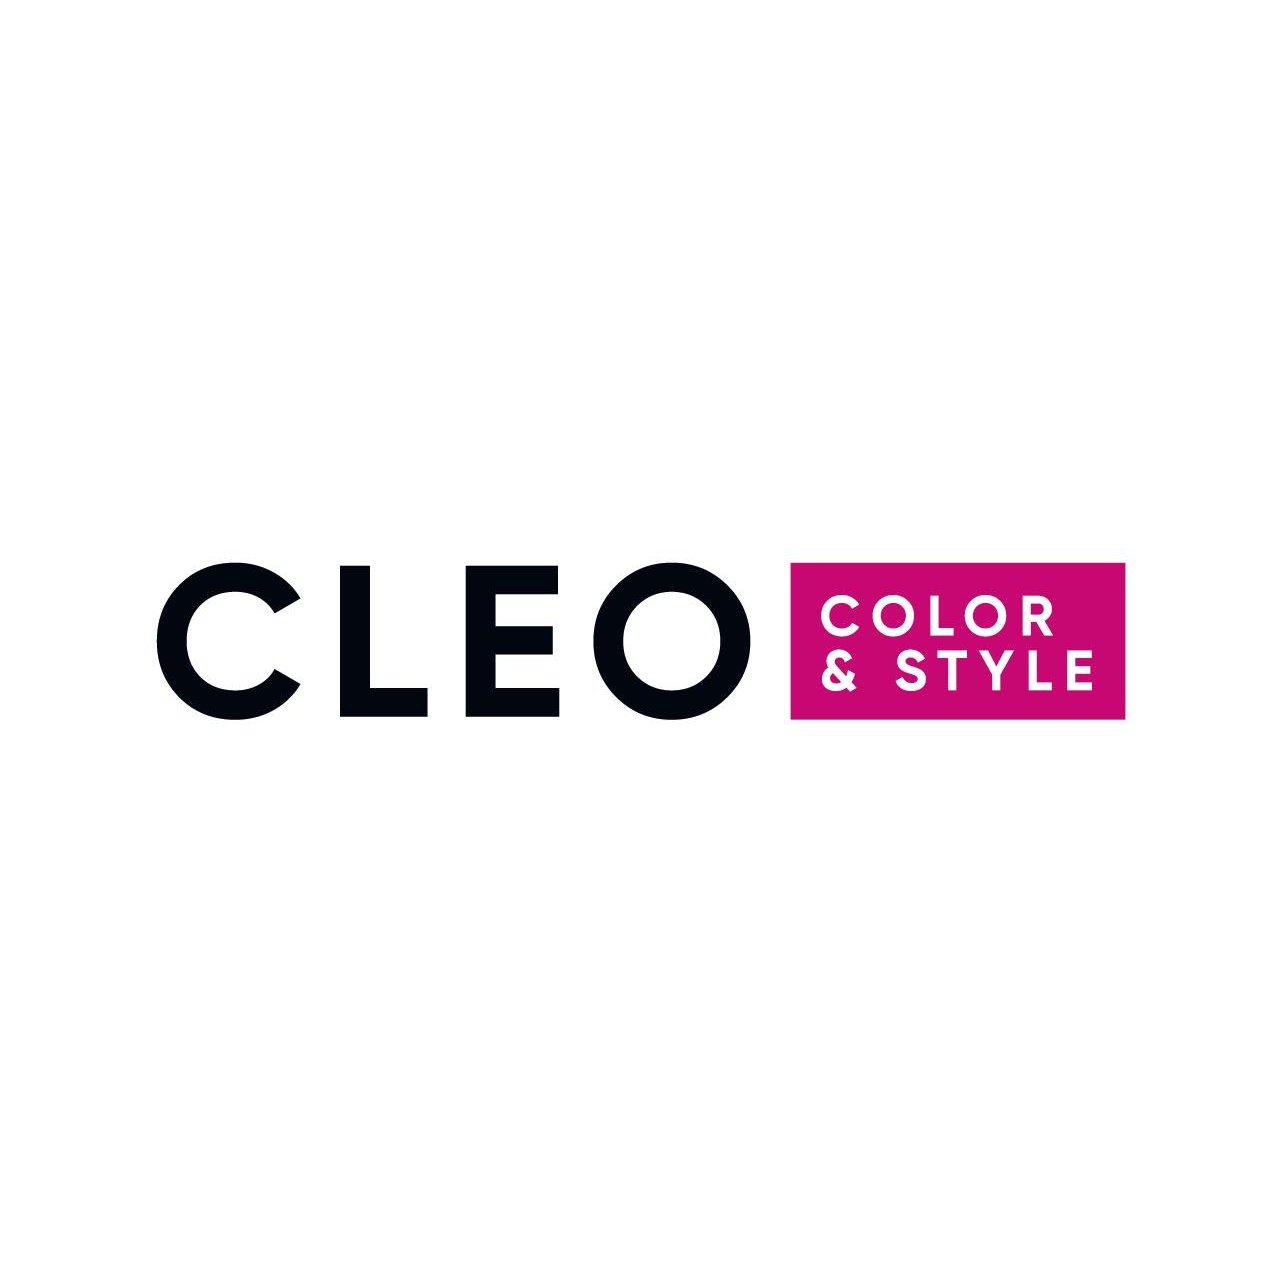 Cleo Color & Style in Wolfsburg - Logo